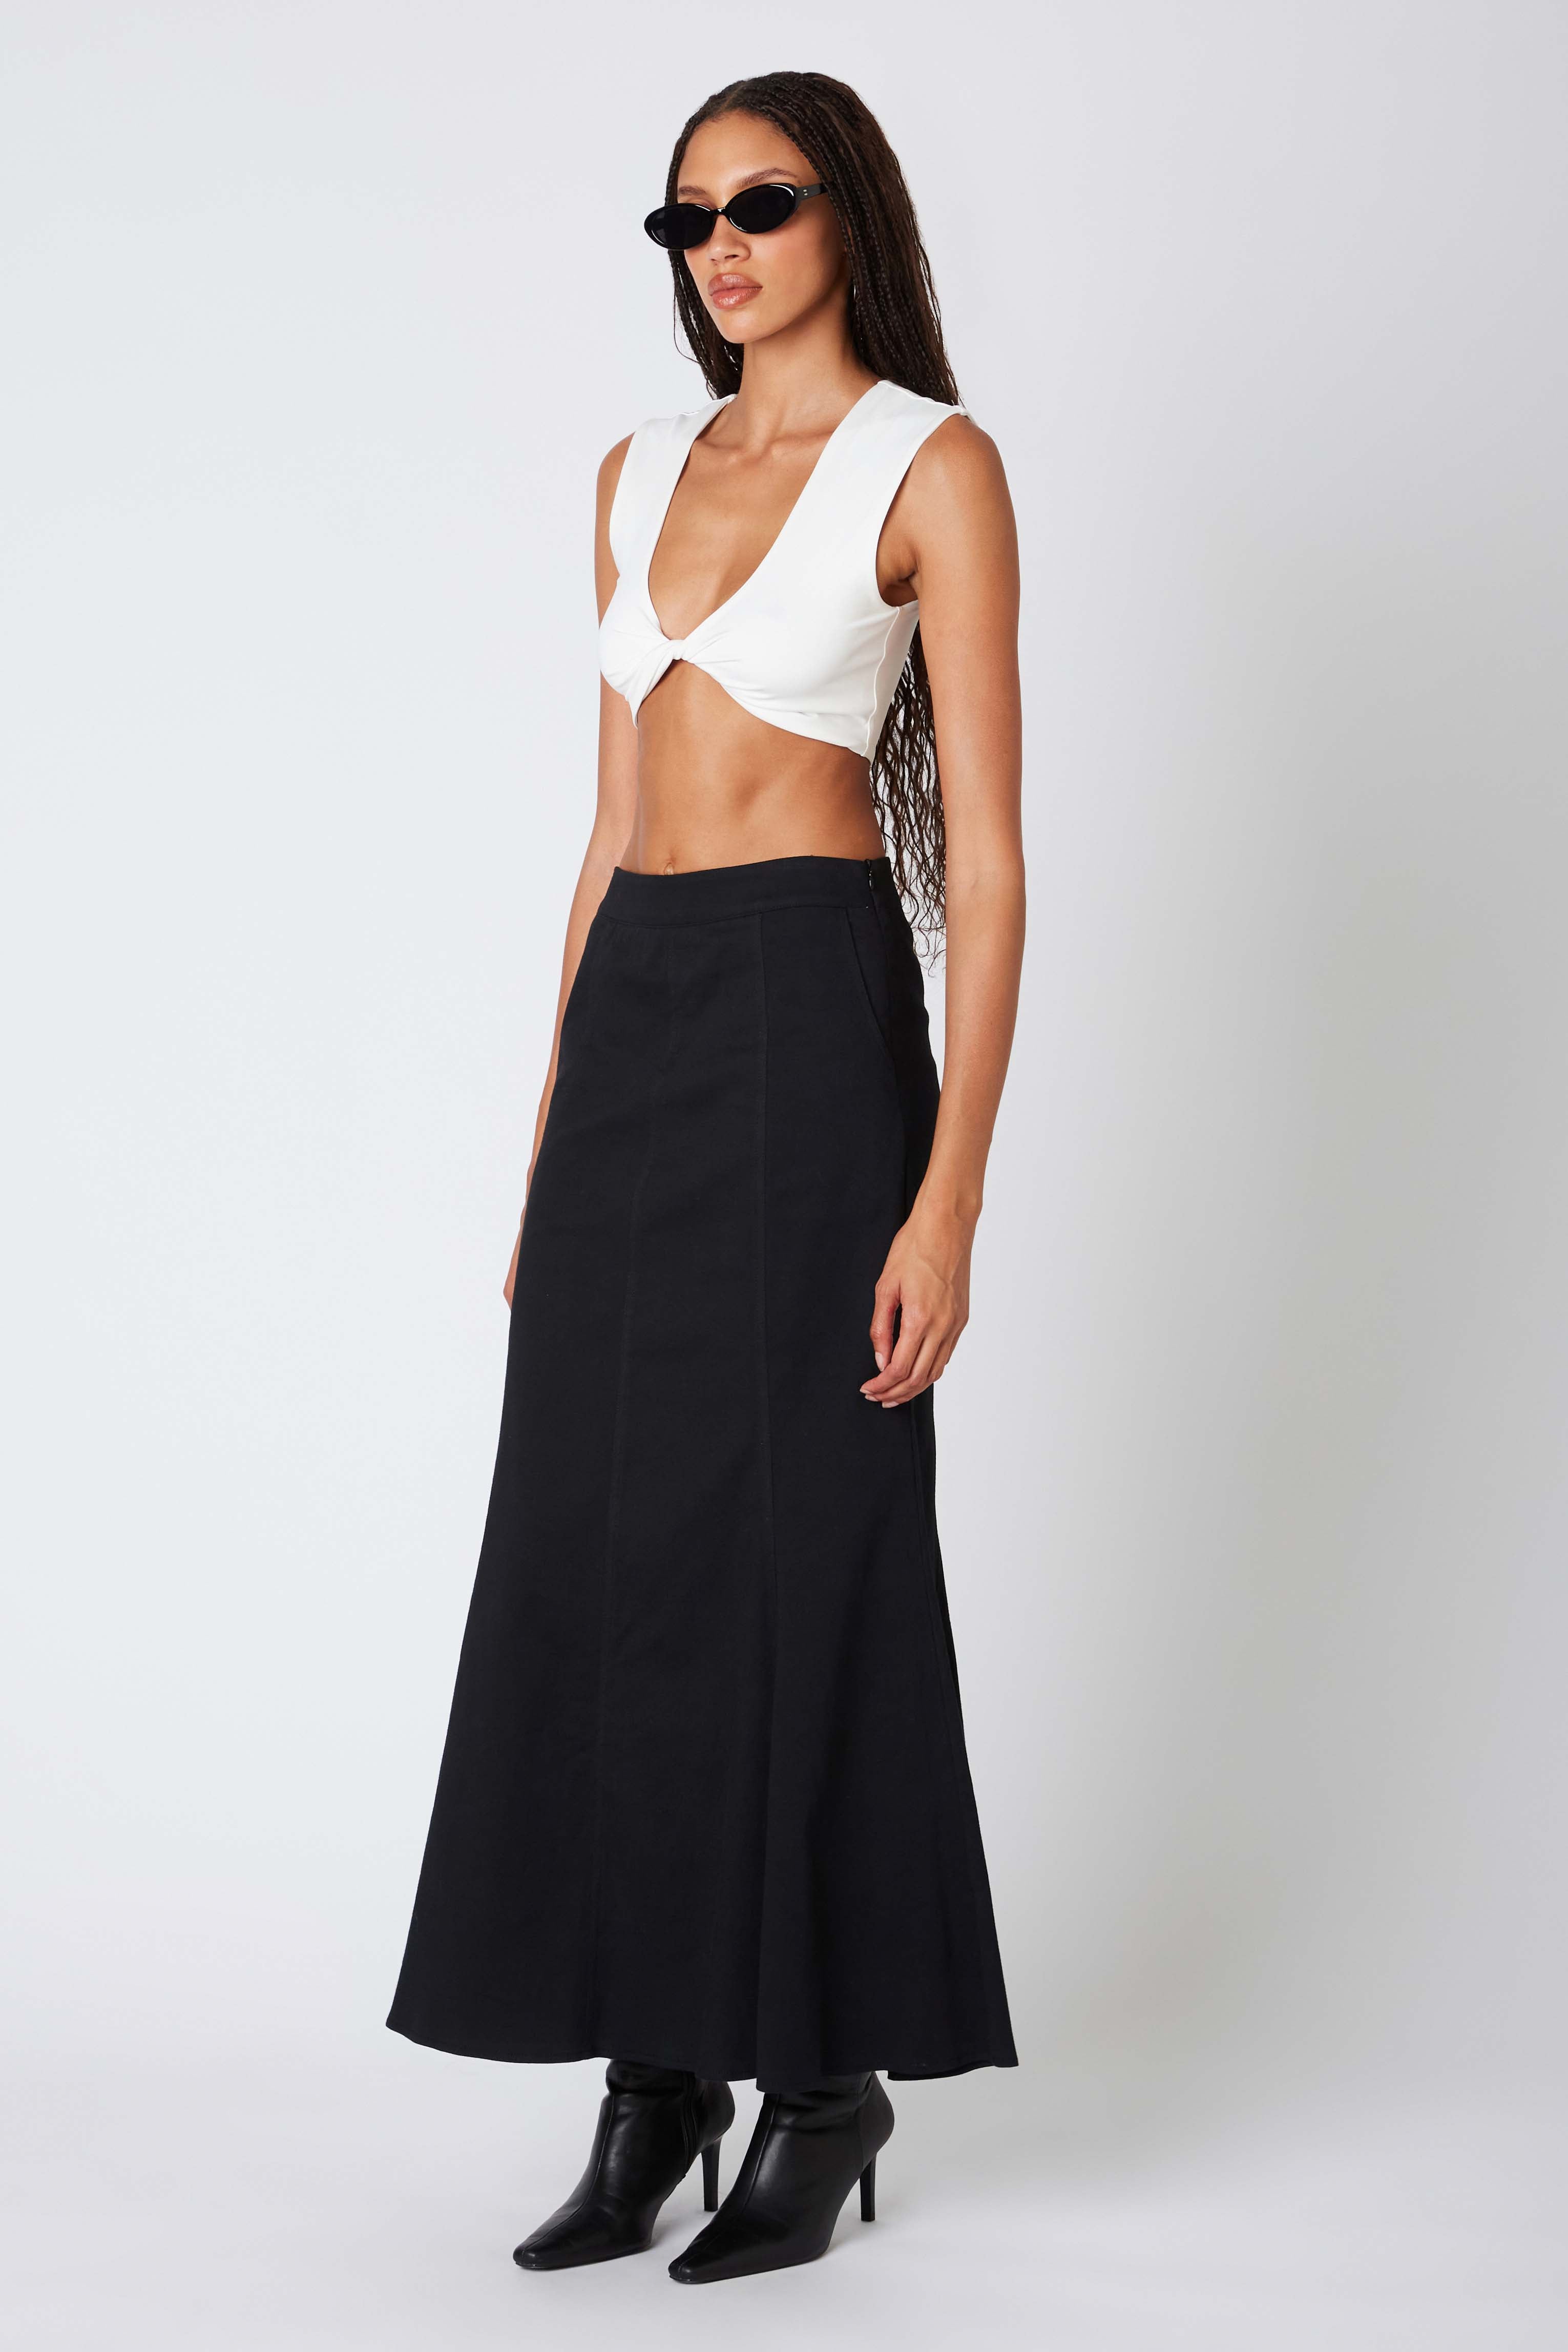 Twill Maxi Skirt in Black Side View